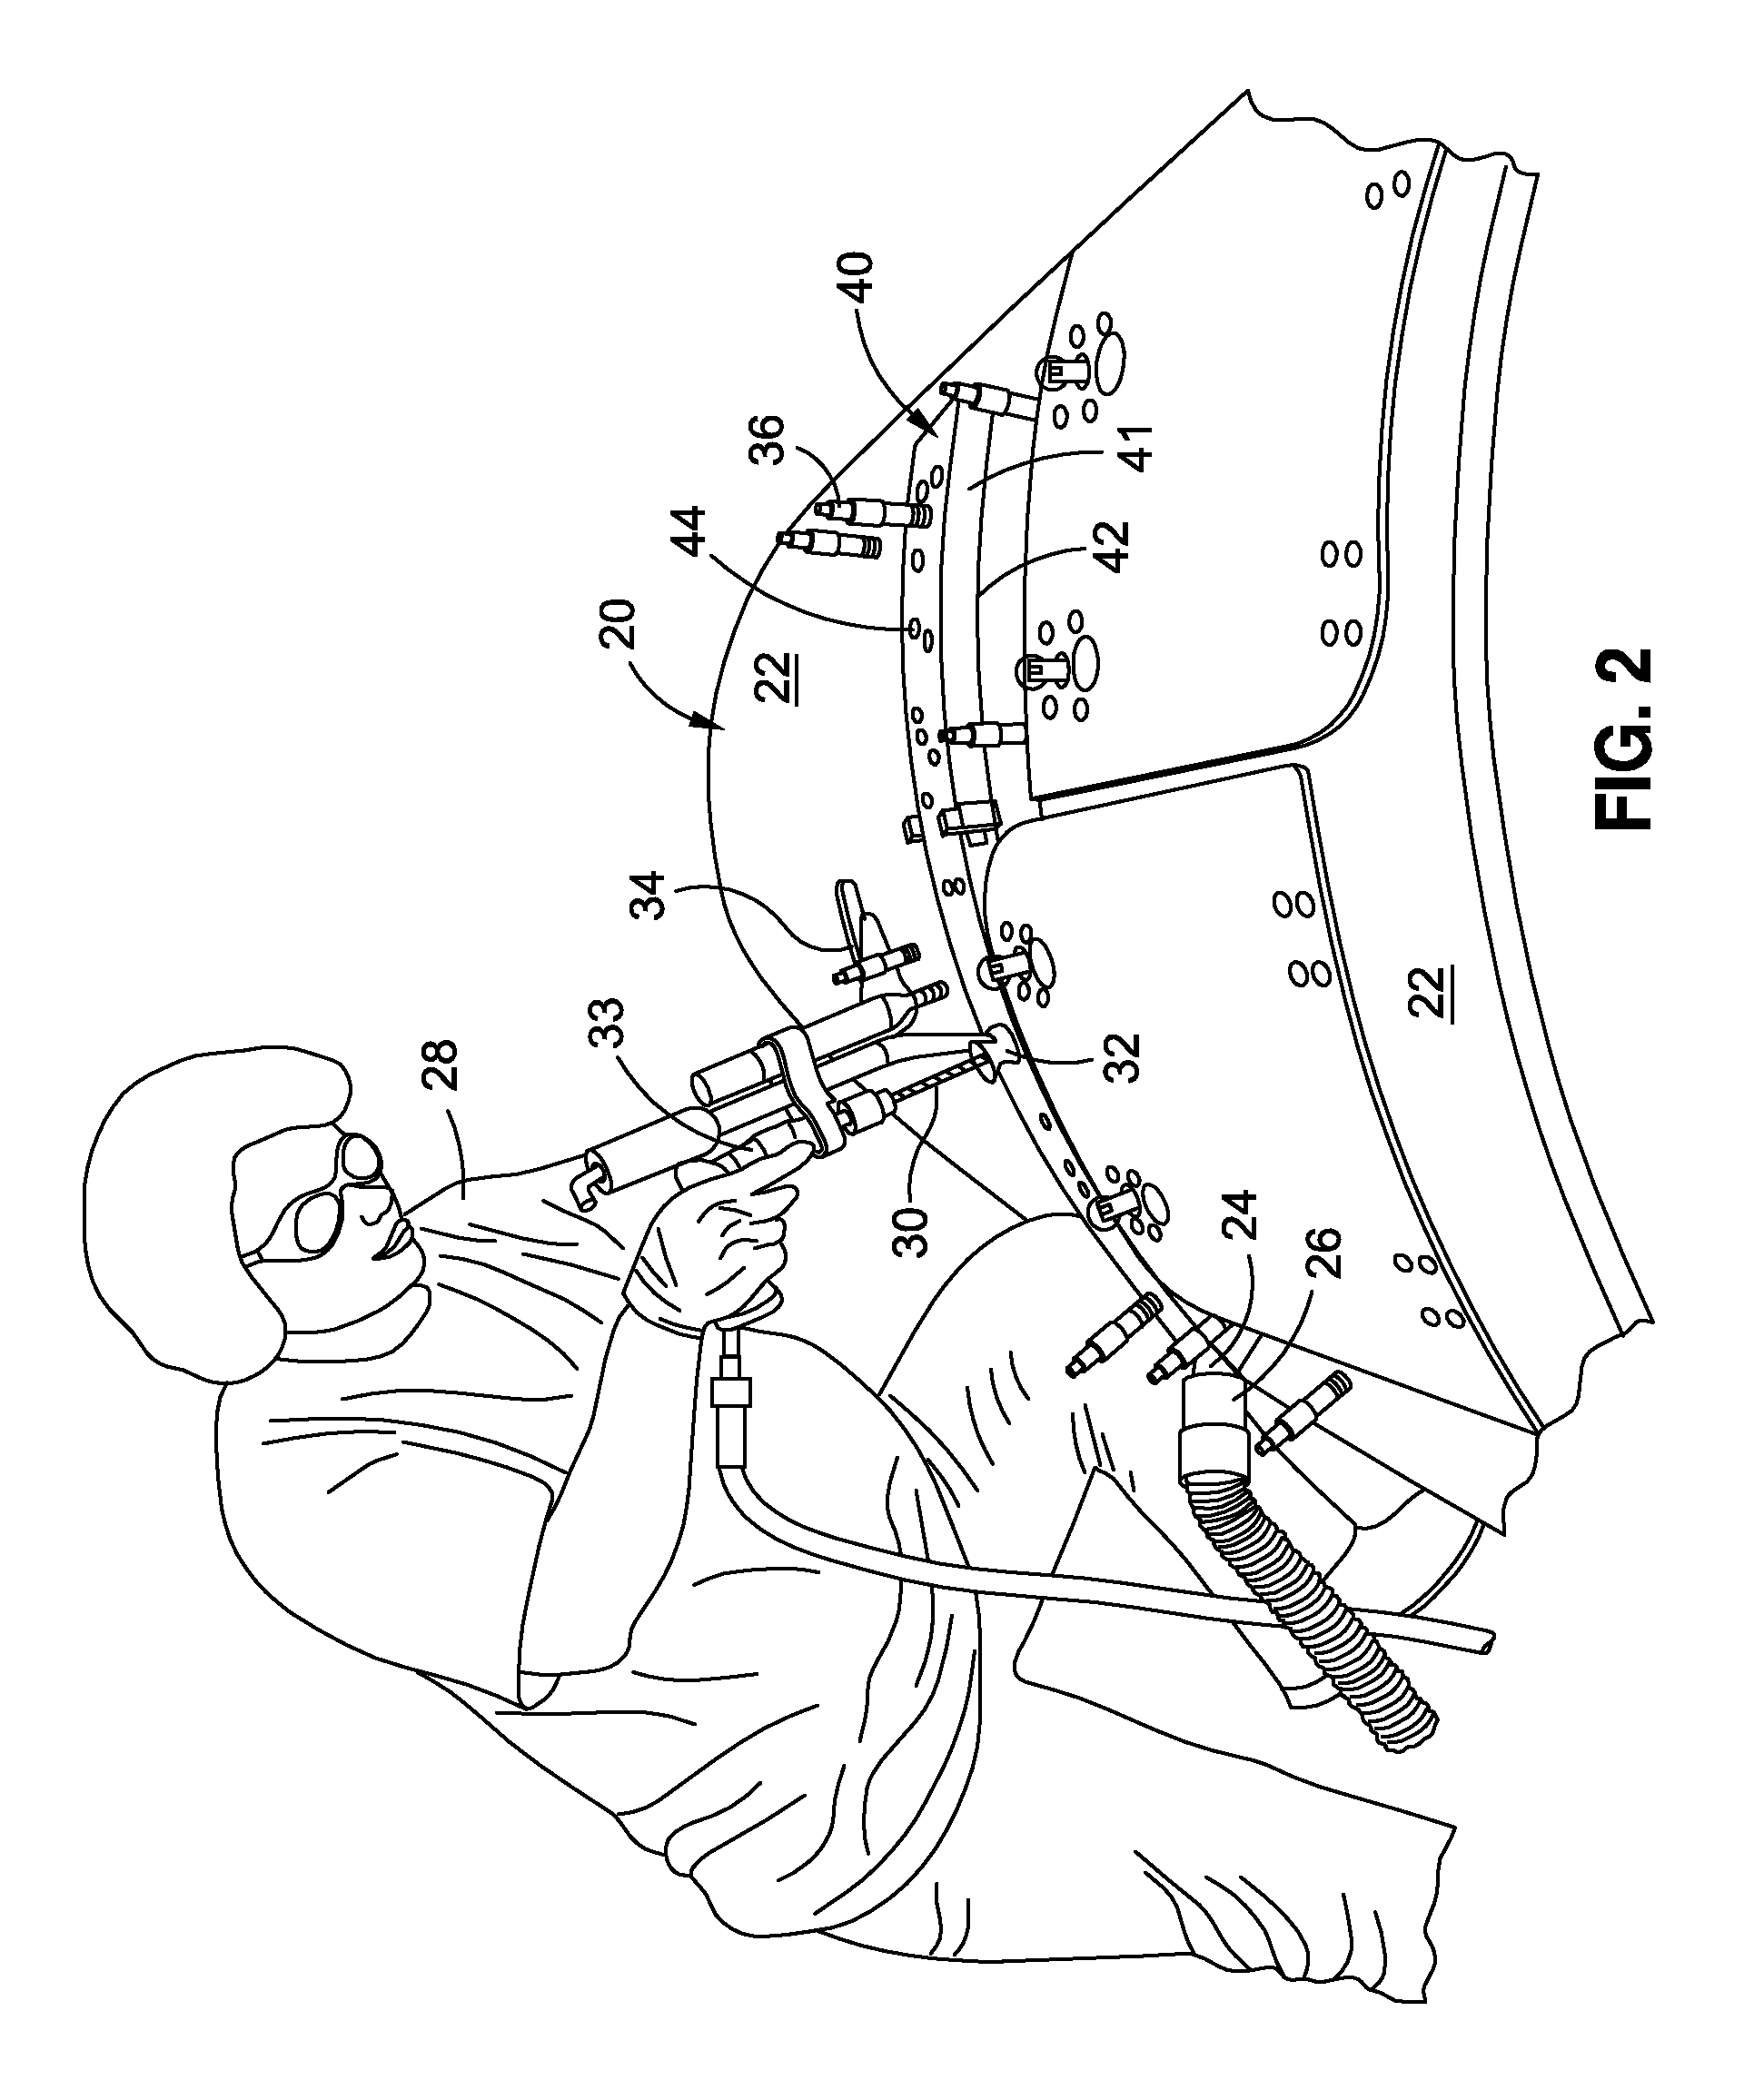 Drill template tool with integral seal